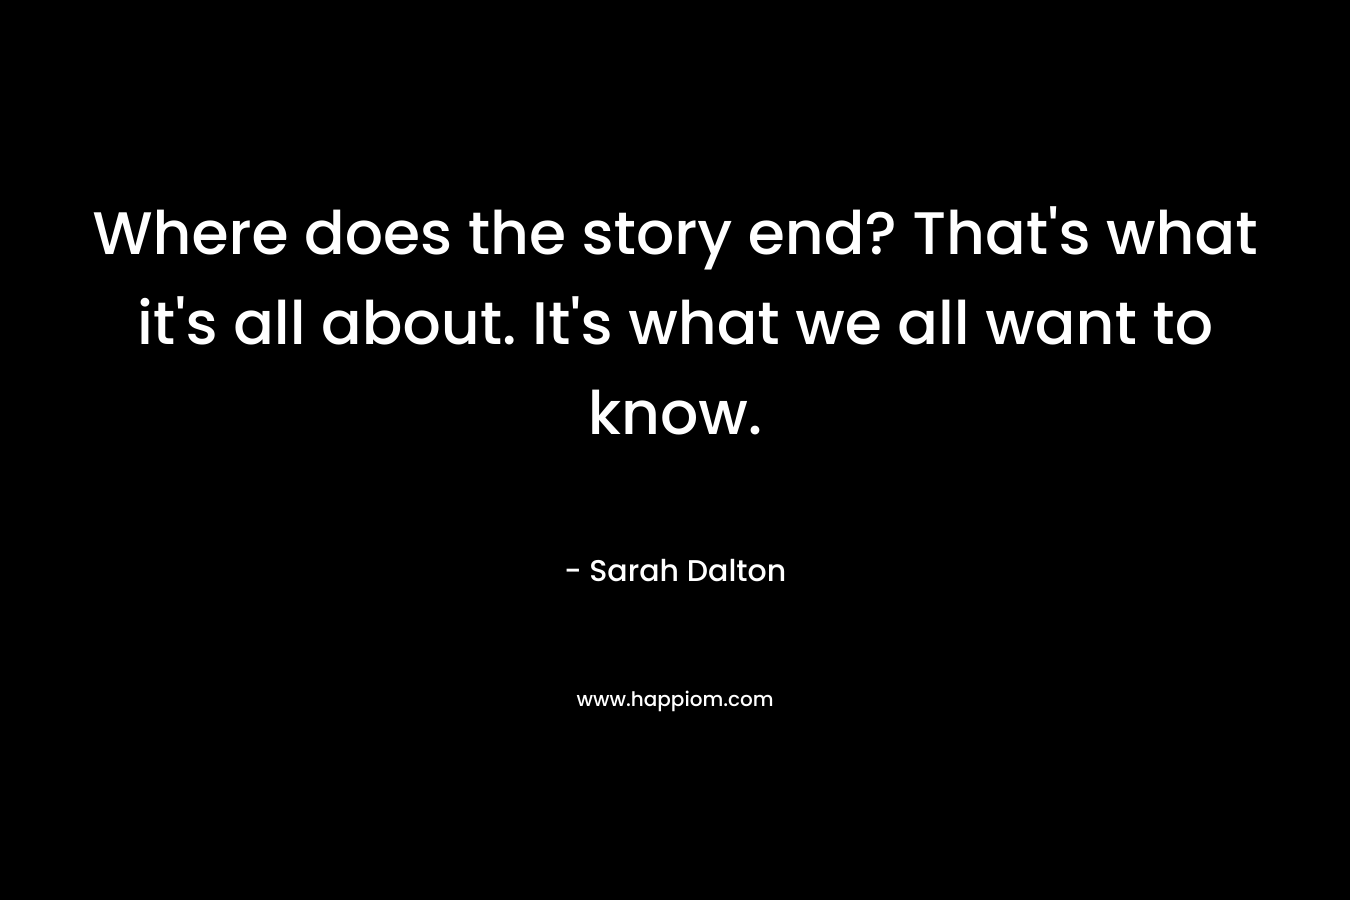 Where does the story end? That’s what it’s all about. It’s what we all want to know. – Sarah Dalton